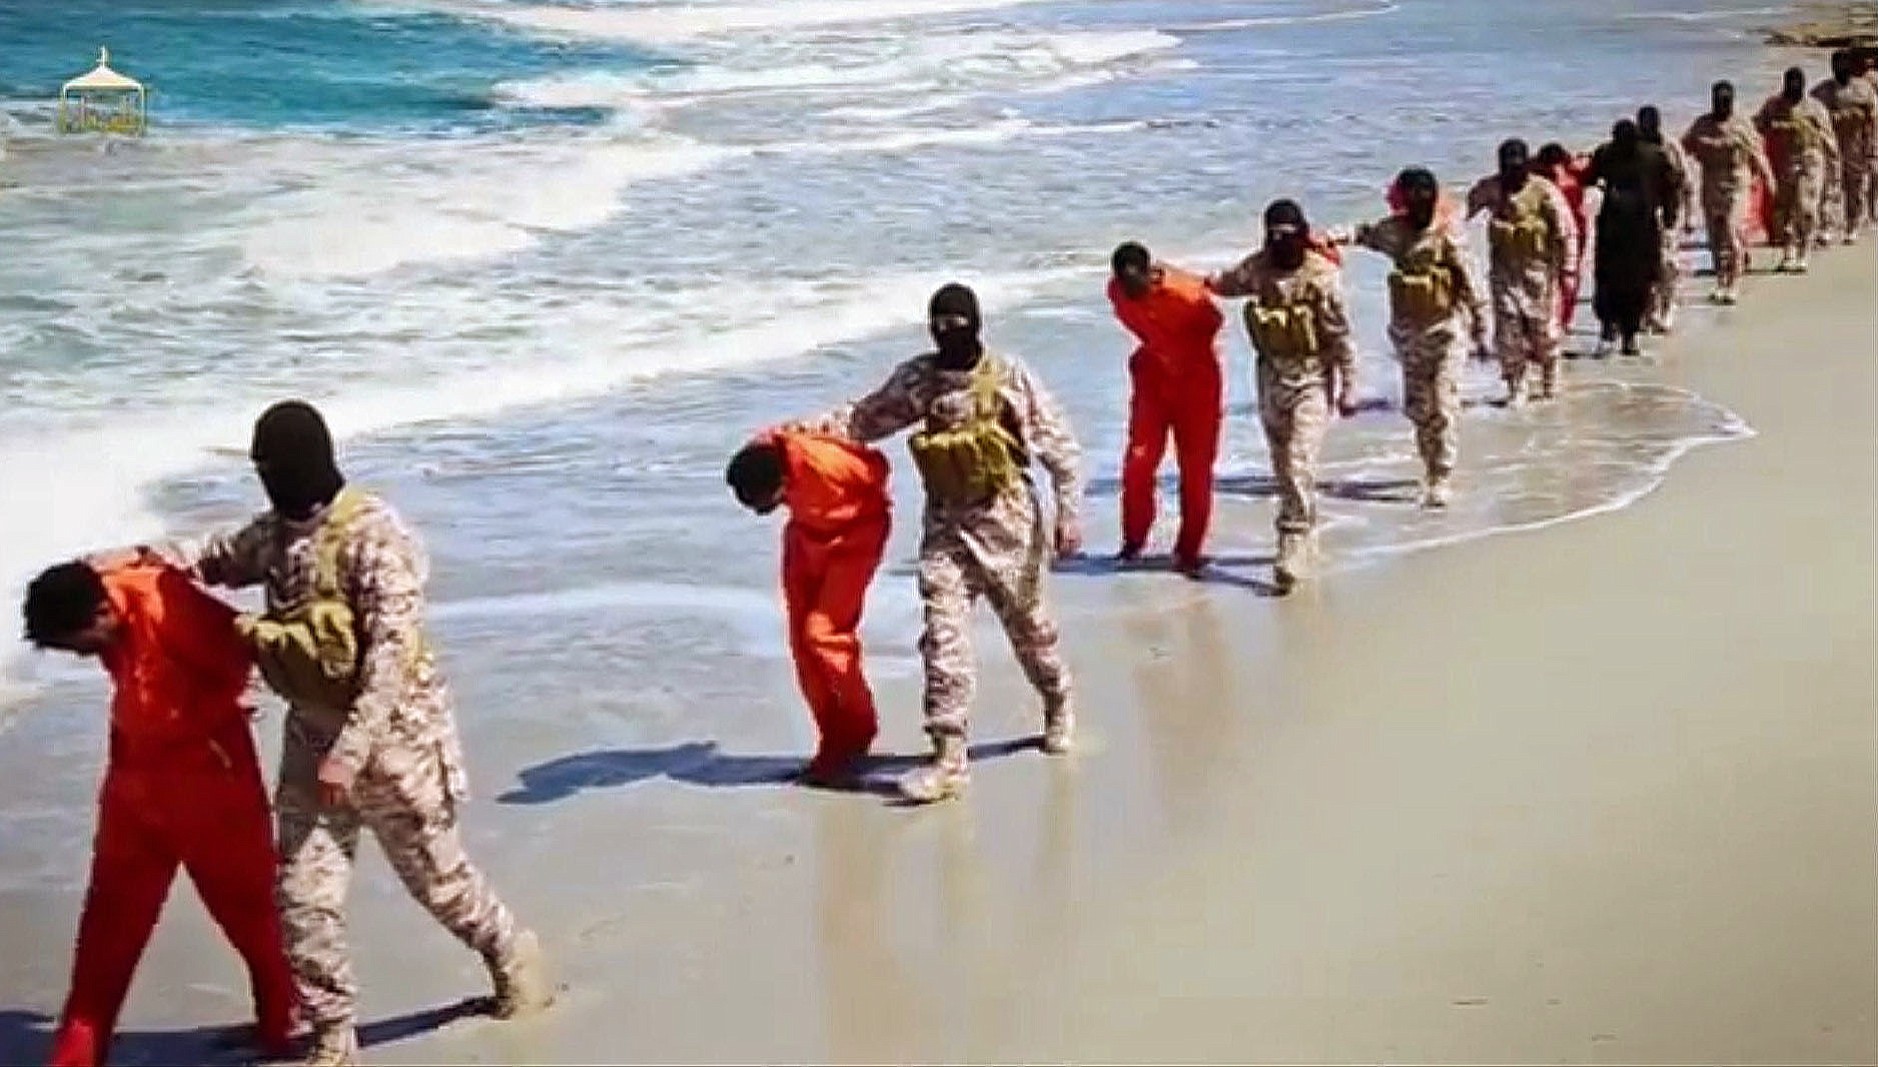 Militant video
Captured Ethiopian Christians were taken to a beach before being killed by Islamic State militants in Libya.